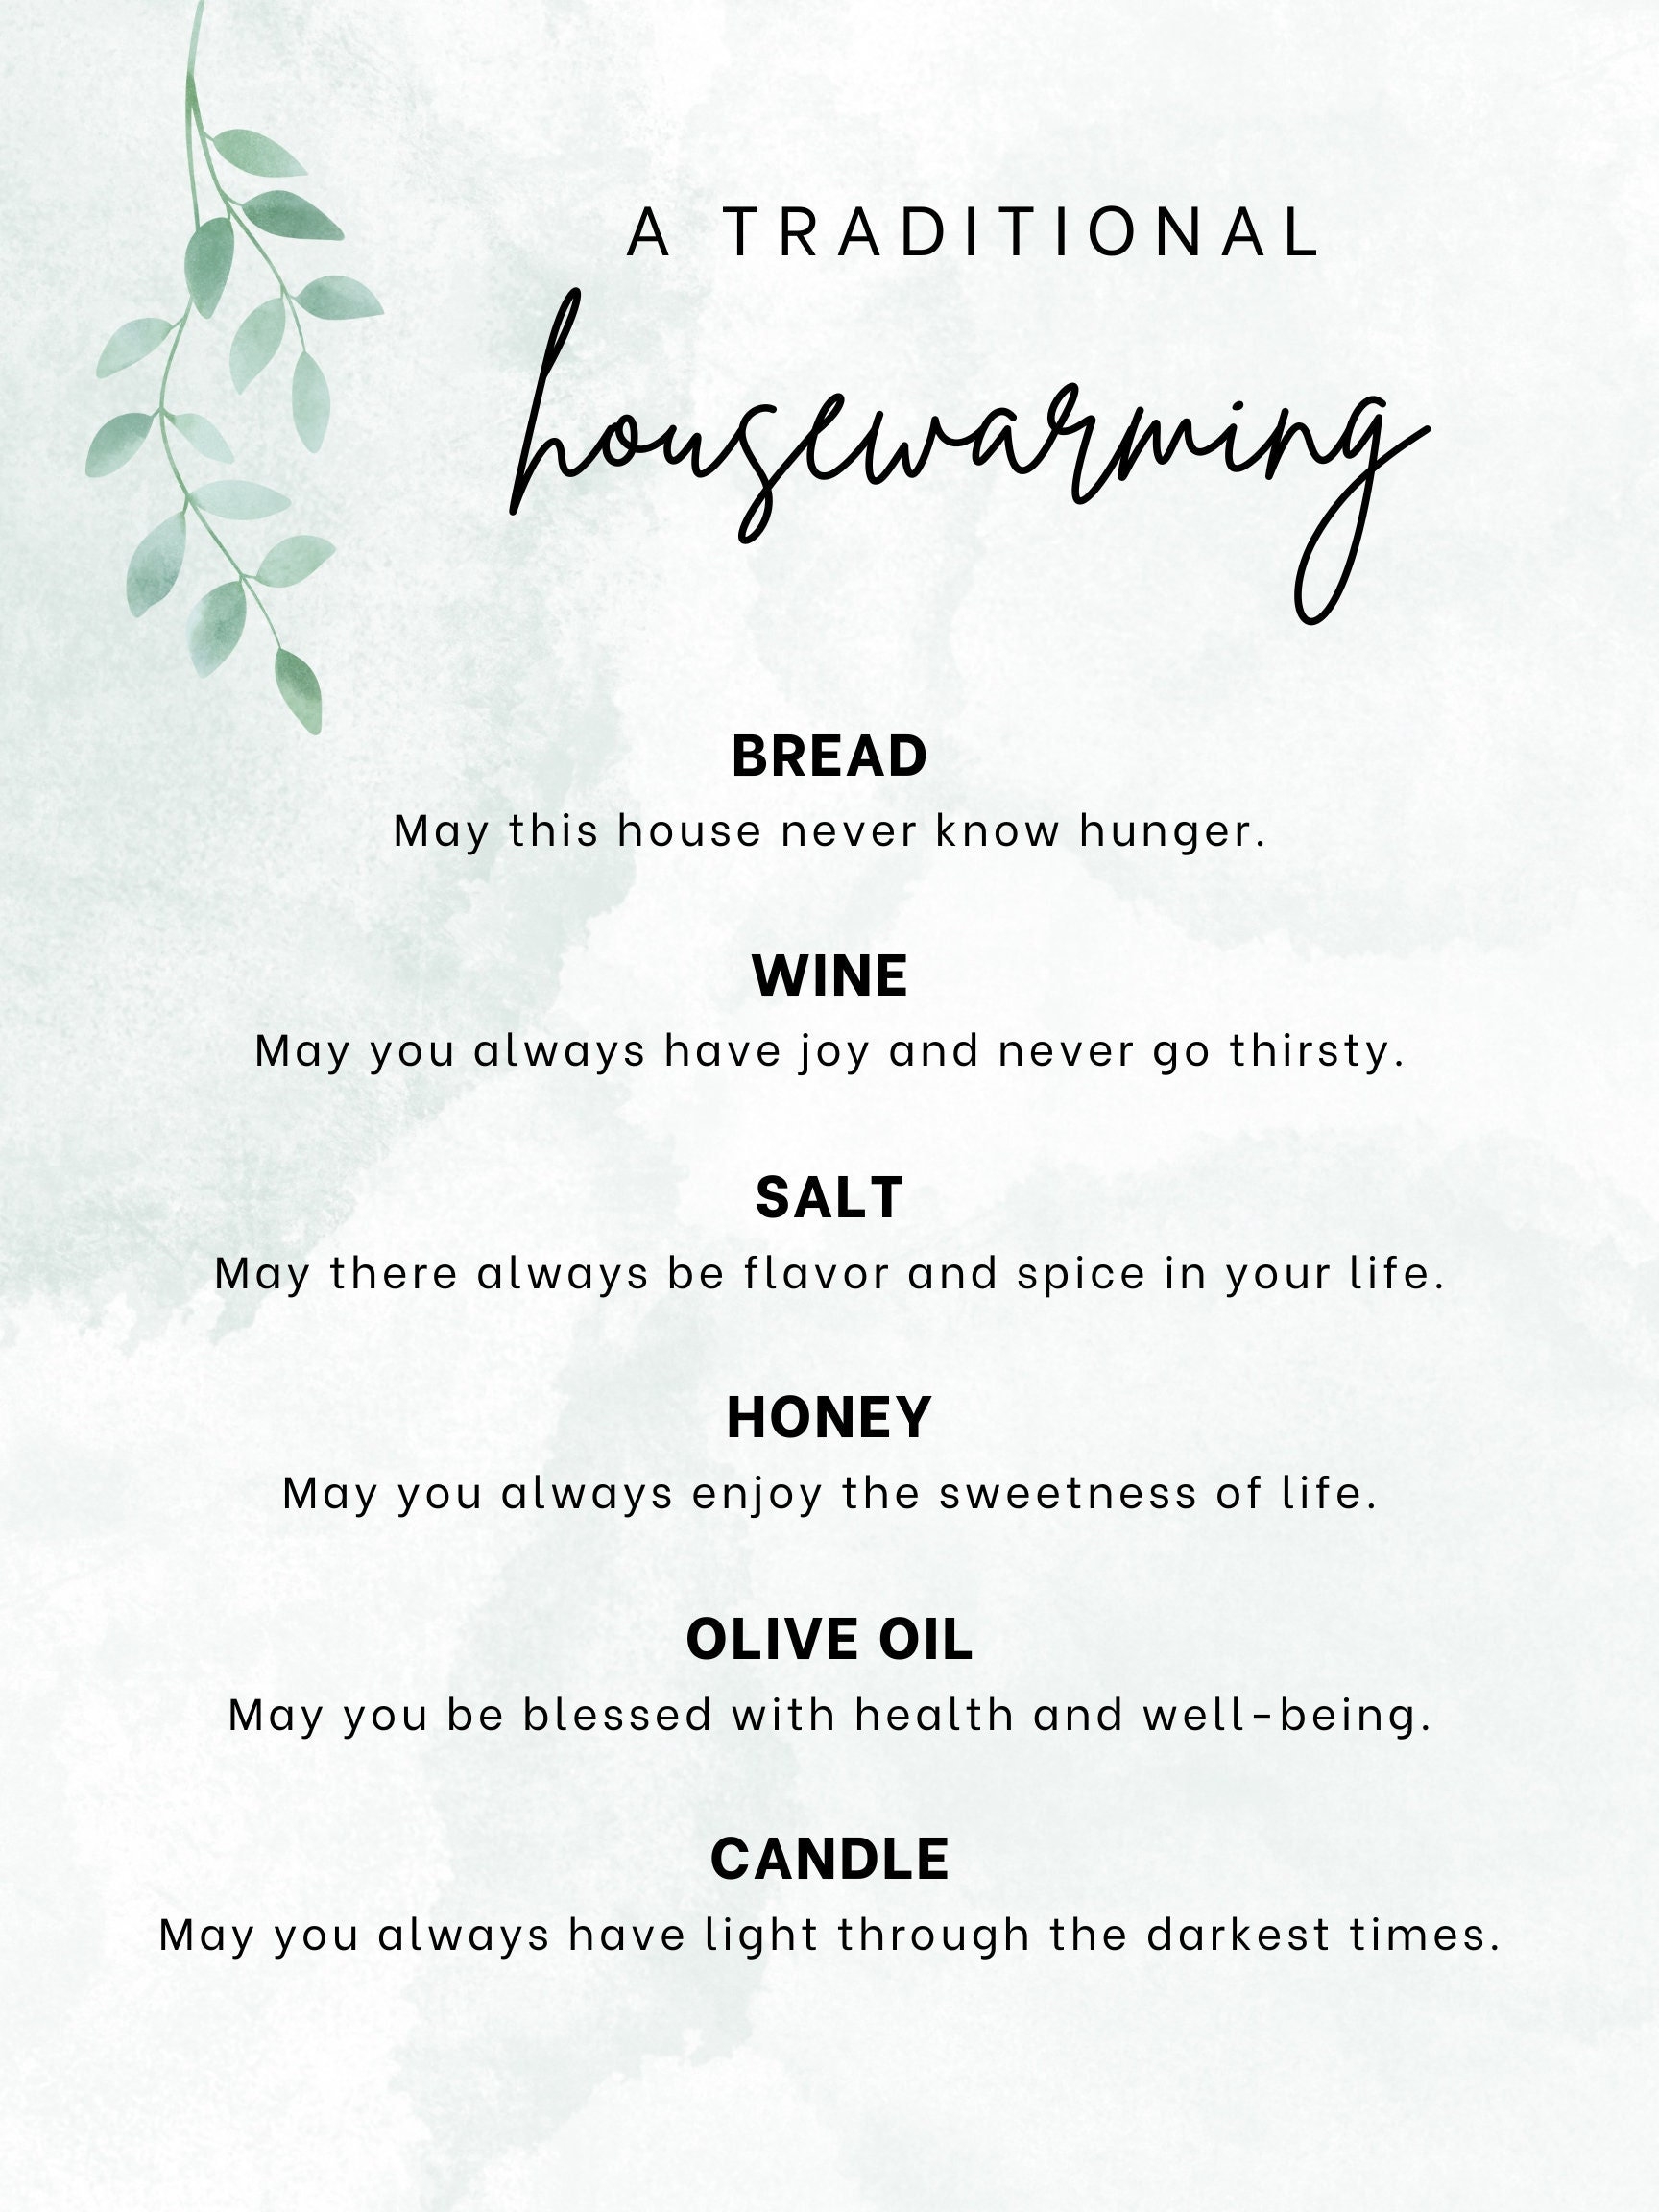 Printable Housewarming Gift Home Blessing Traditional DIY Bread Wine Salt Honey Olive Oil Candle Card For Gift Basket Etsy